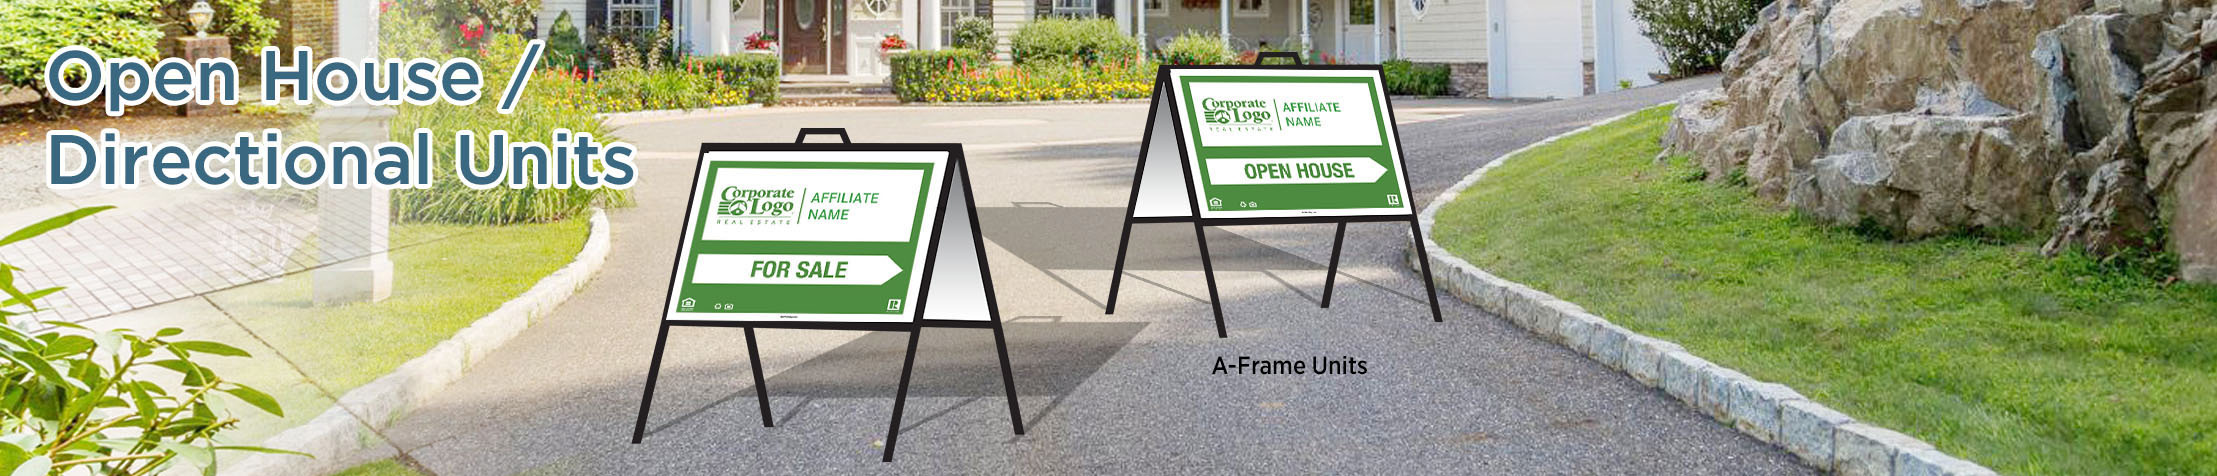 Better Homes and Gardens Real Estate Open House/Directional Units - Better Homes and Gardens directional real estate signs | BestPrintBuy.com